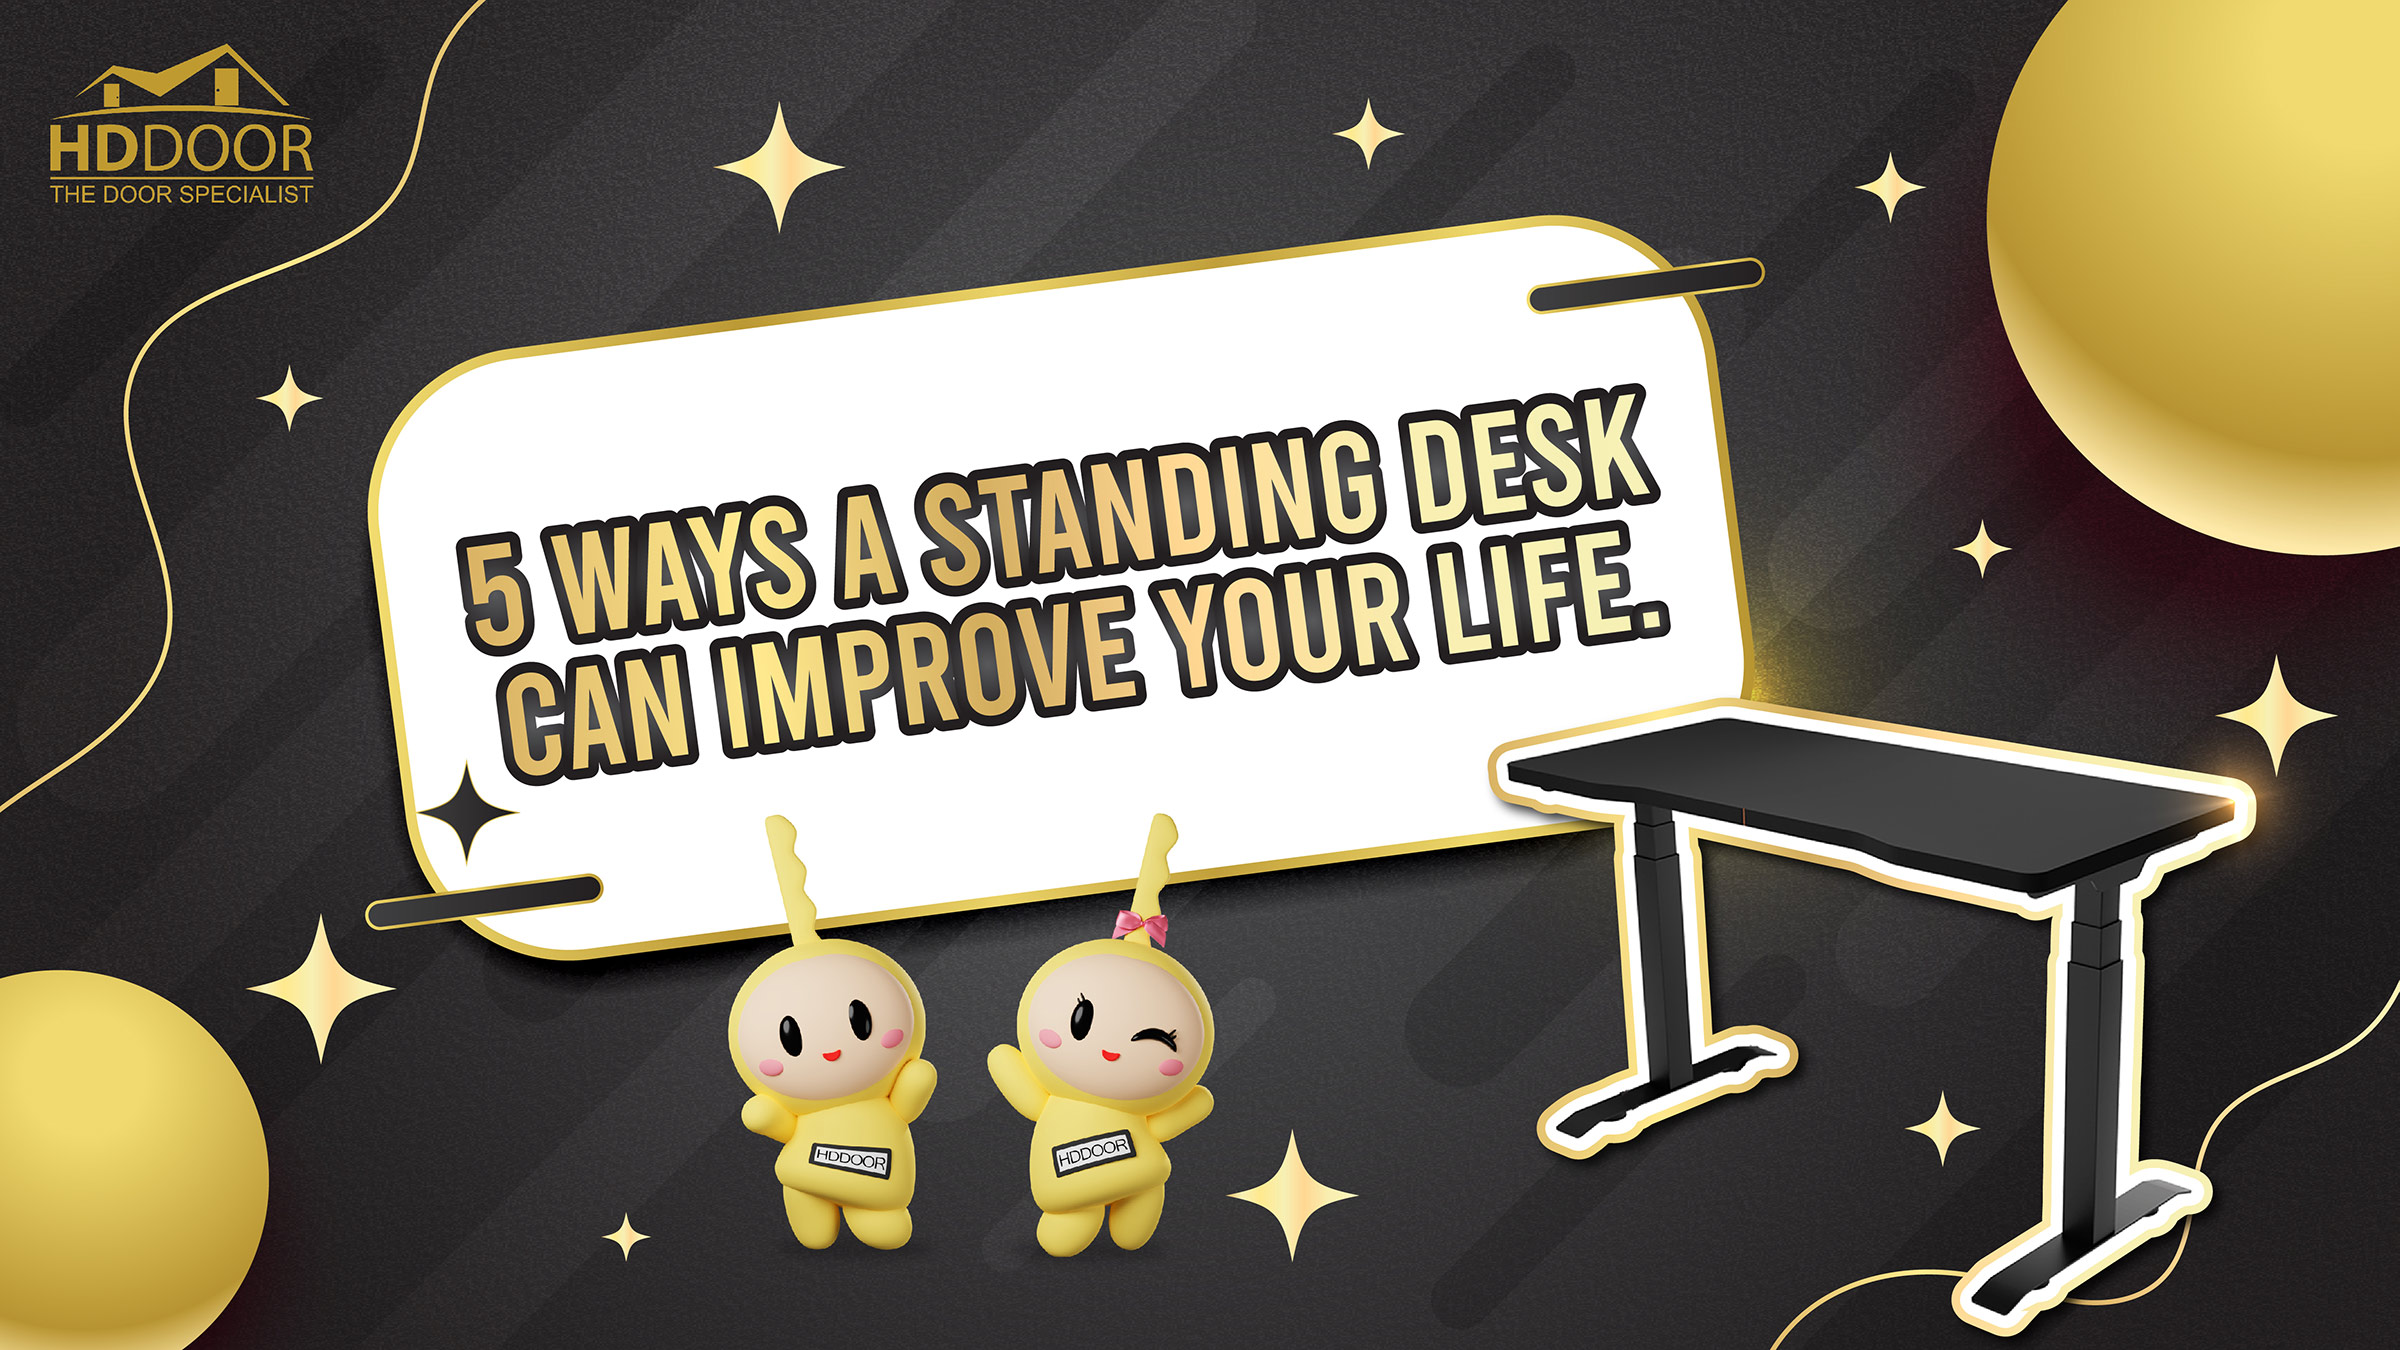 5 ways a standing desk can improve your life